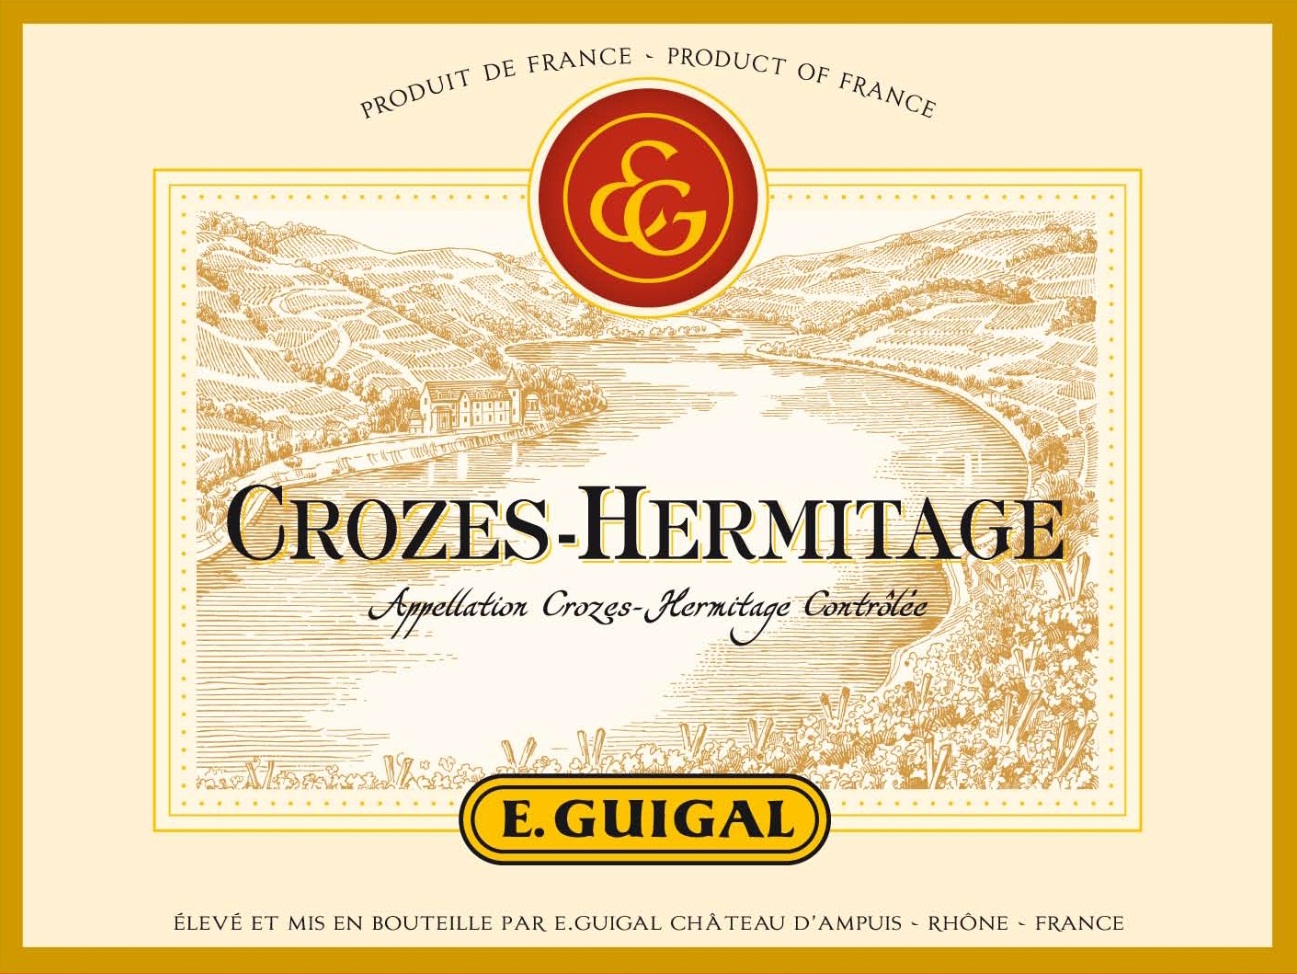 E. Guigal - Crozes-Hermitage - Red label